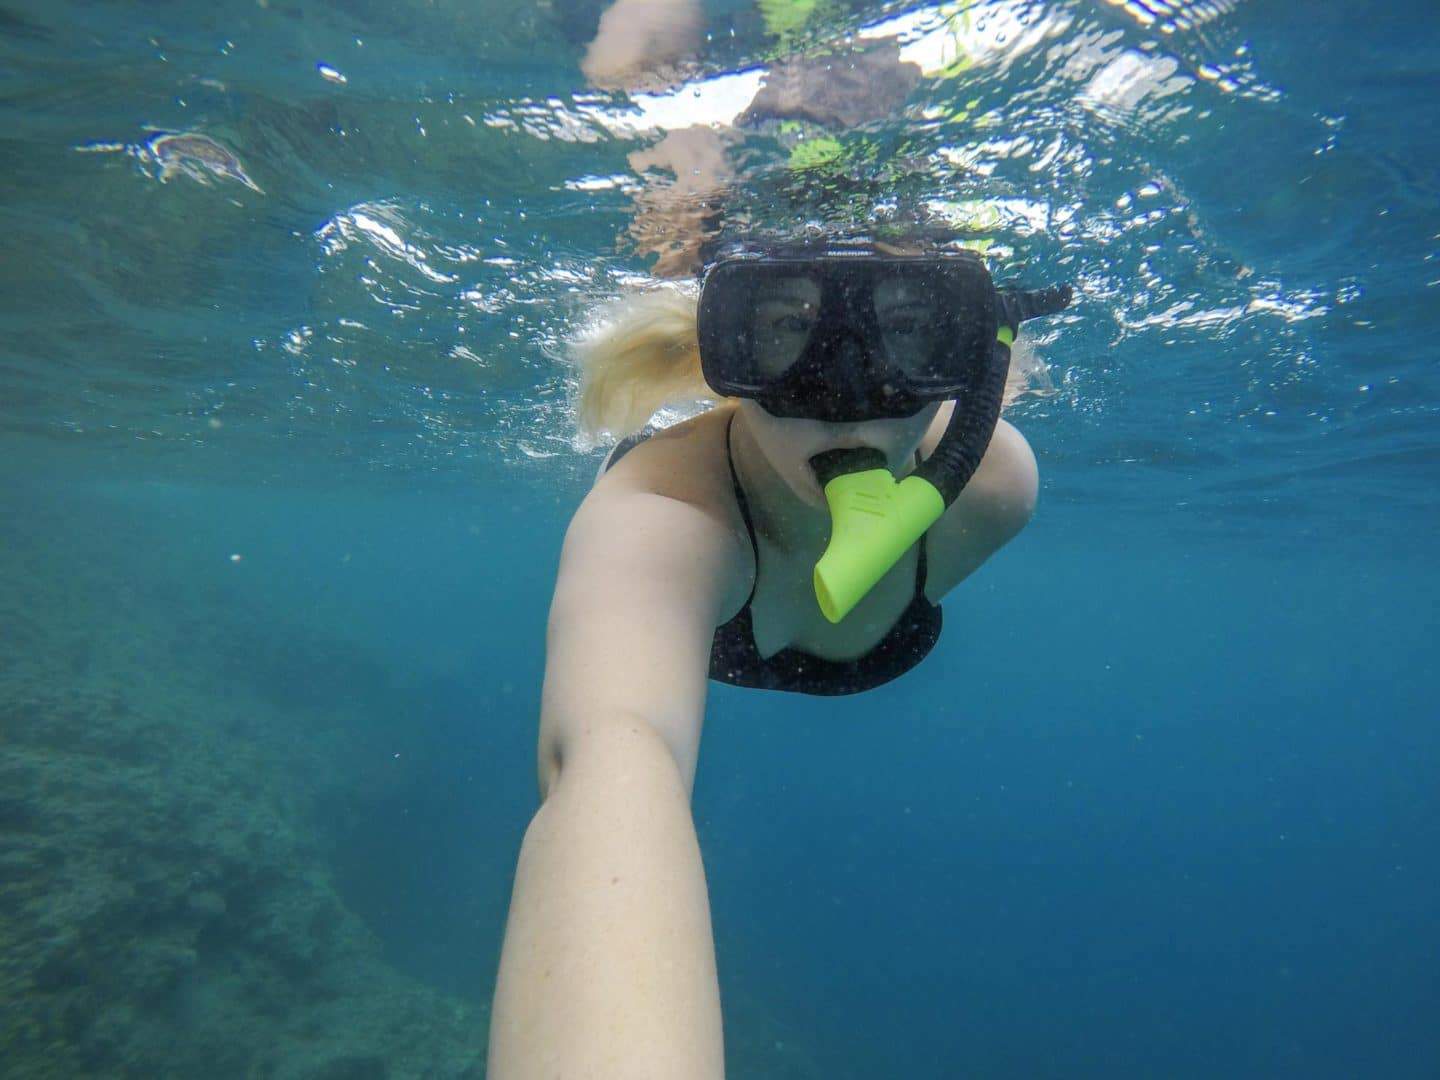 dominica day tours, ellie quinn snorkelling in Dominica